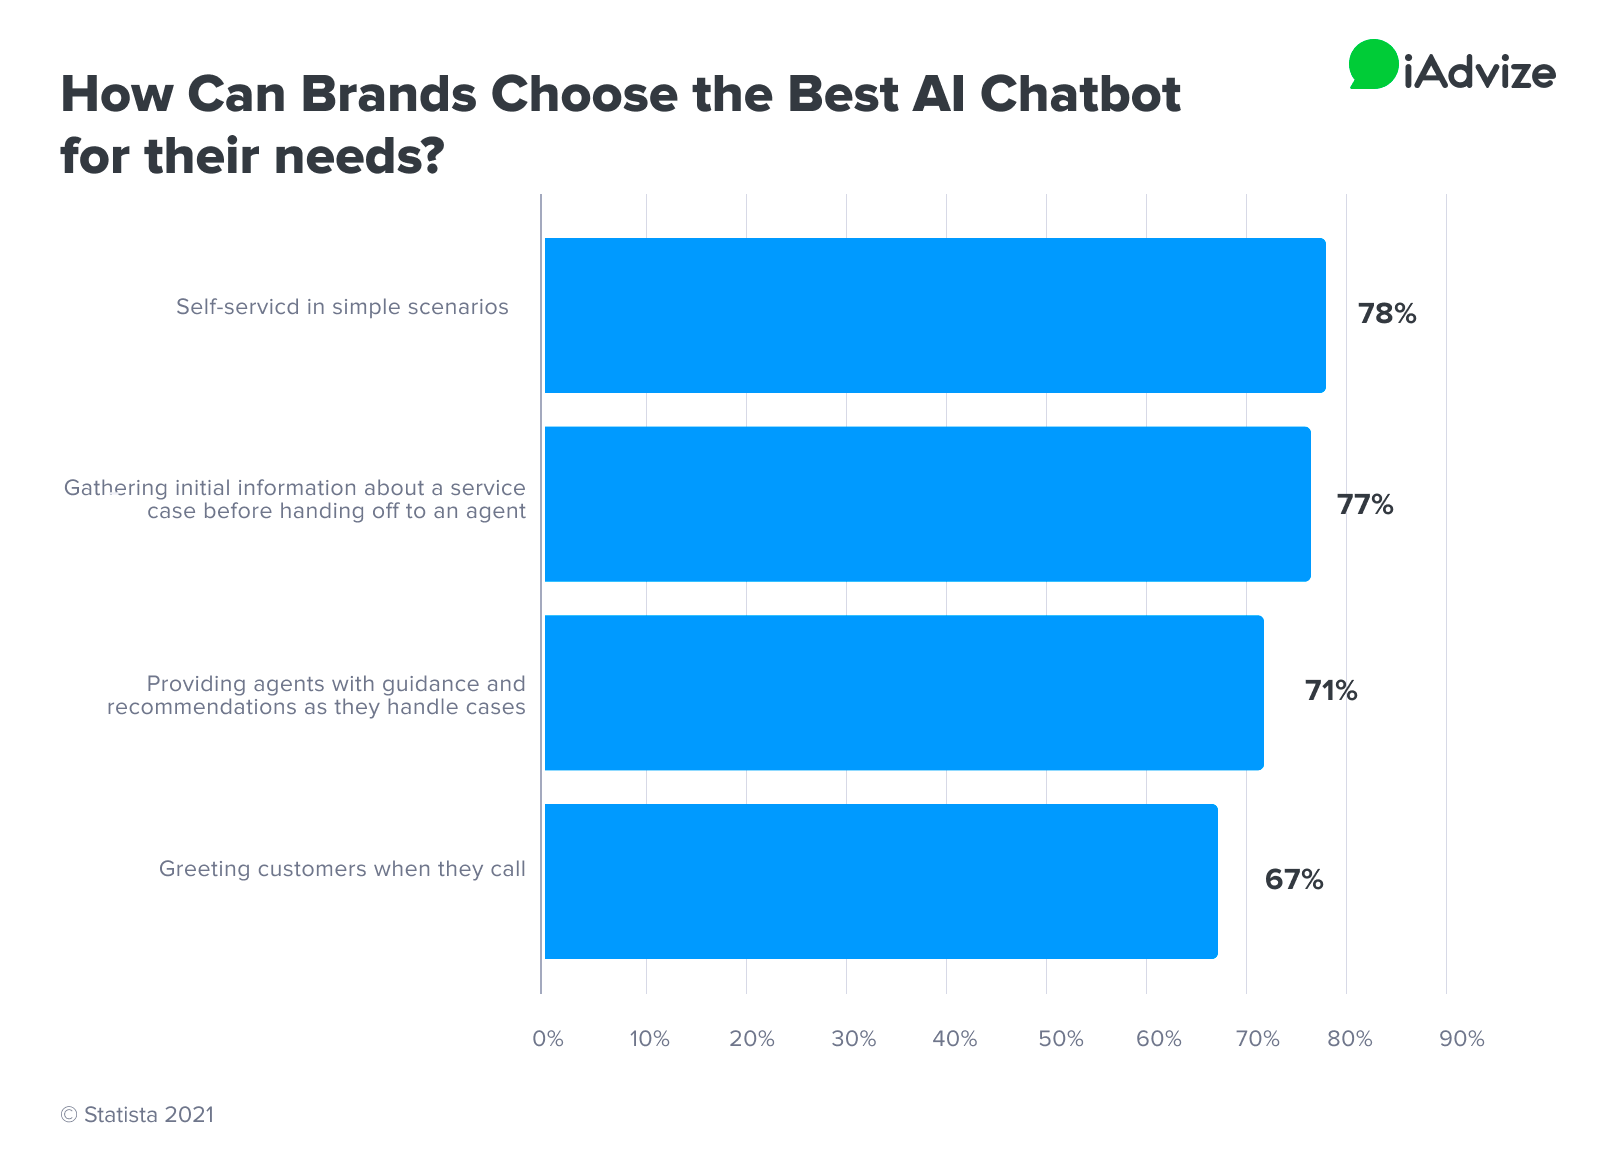 How Can Brands Choose the Best AI Chatbot for Their Needs?